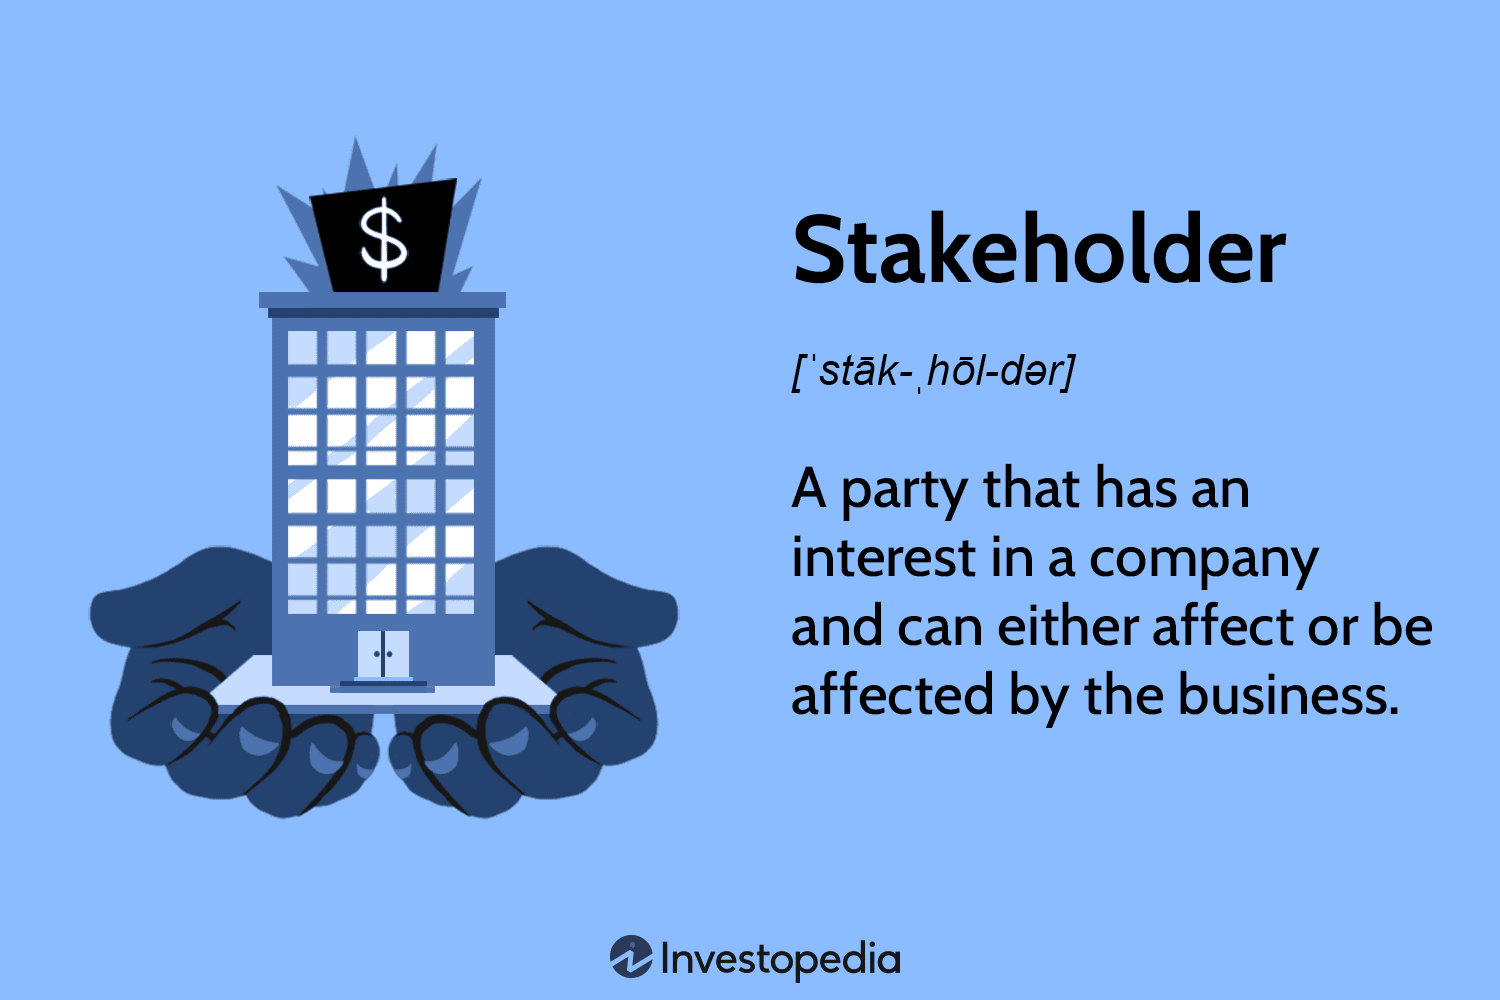 Definition of a stakeholder